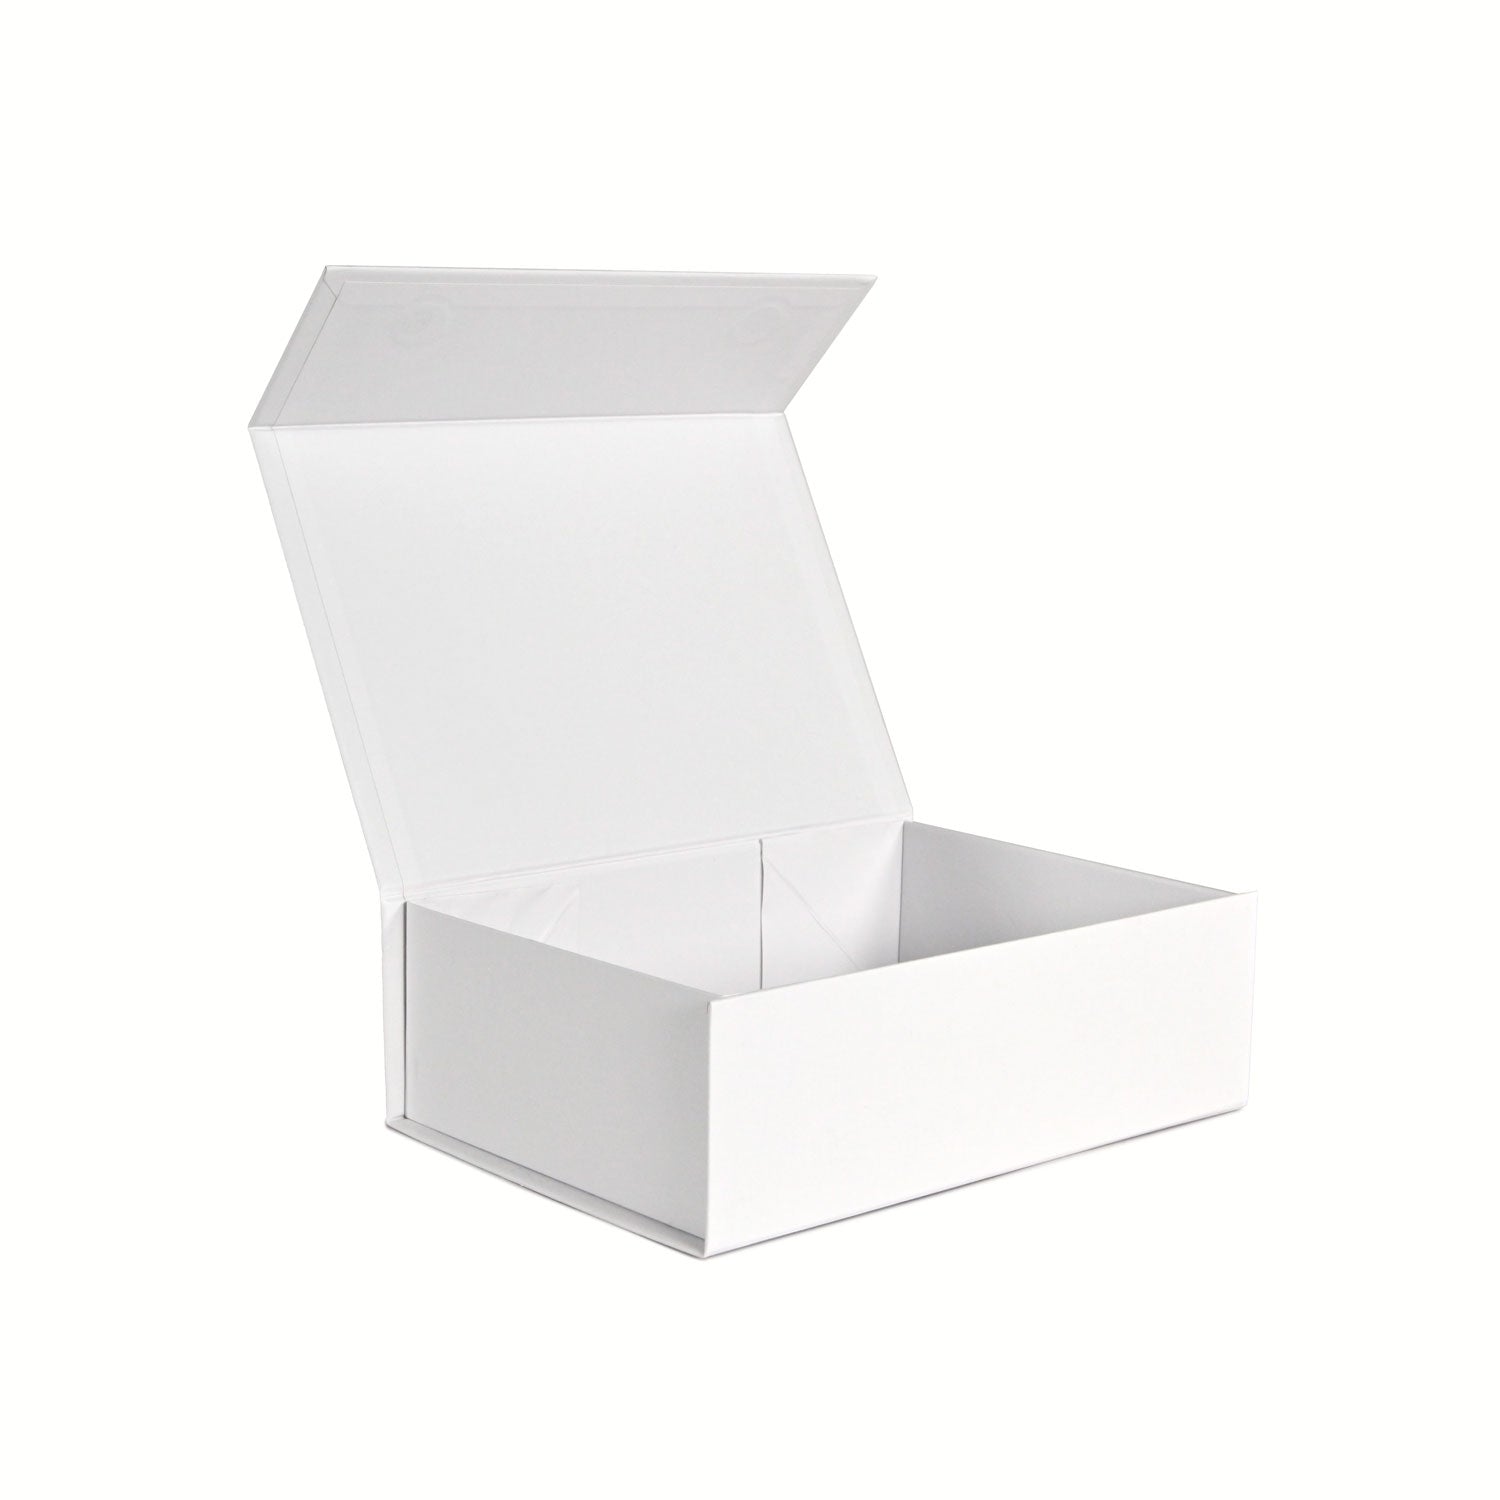 Small sleek magnetic gift box, perfect for special occasions | NEON Packaging